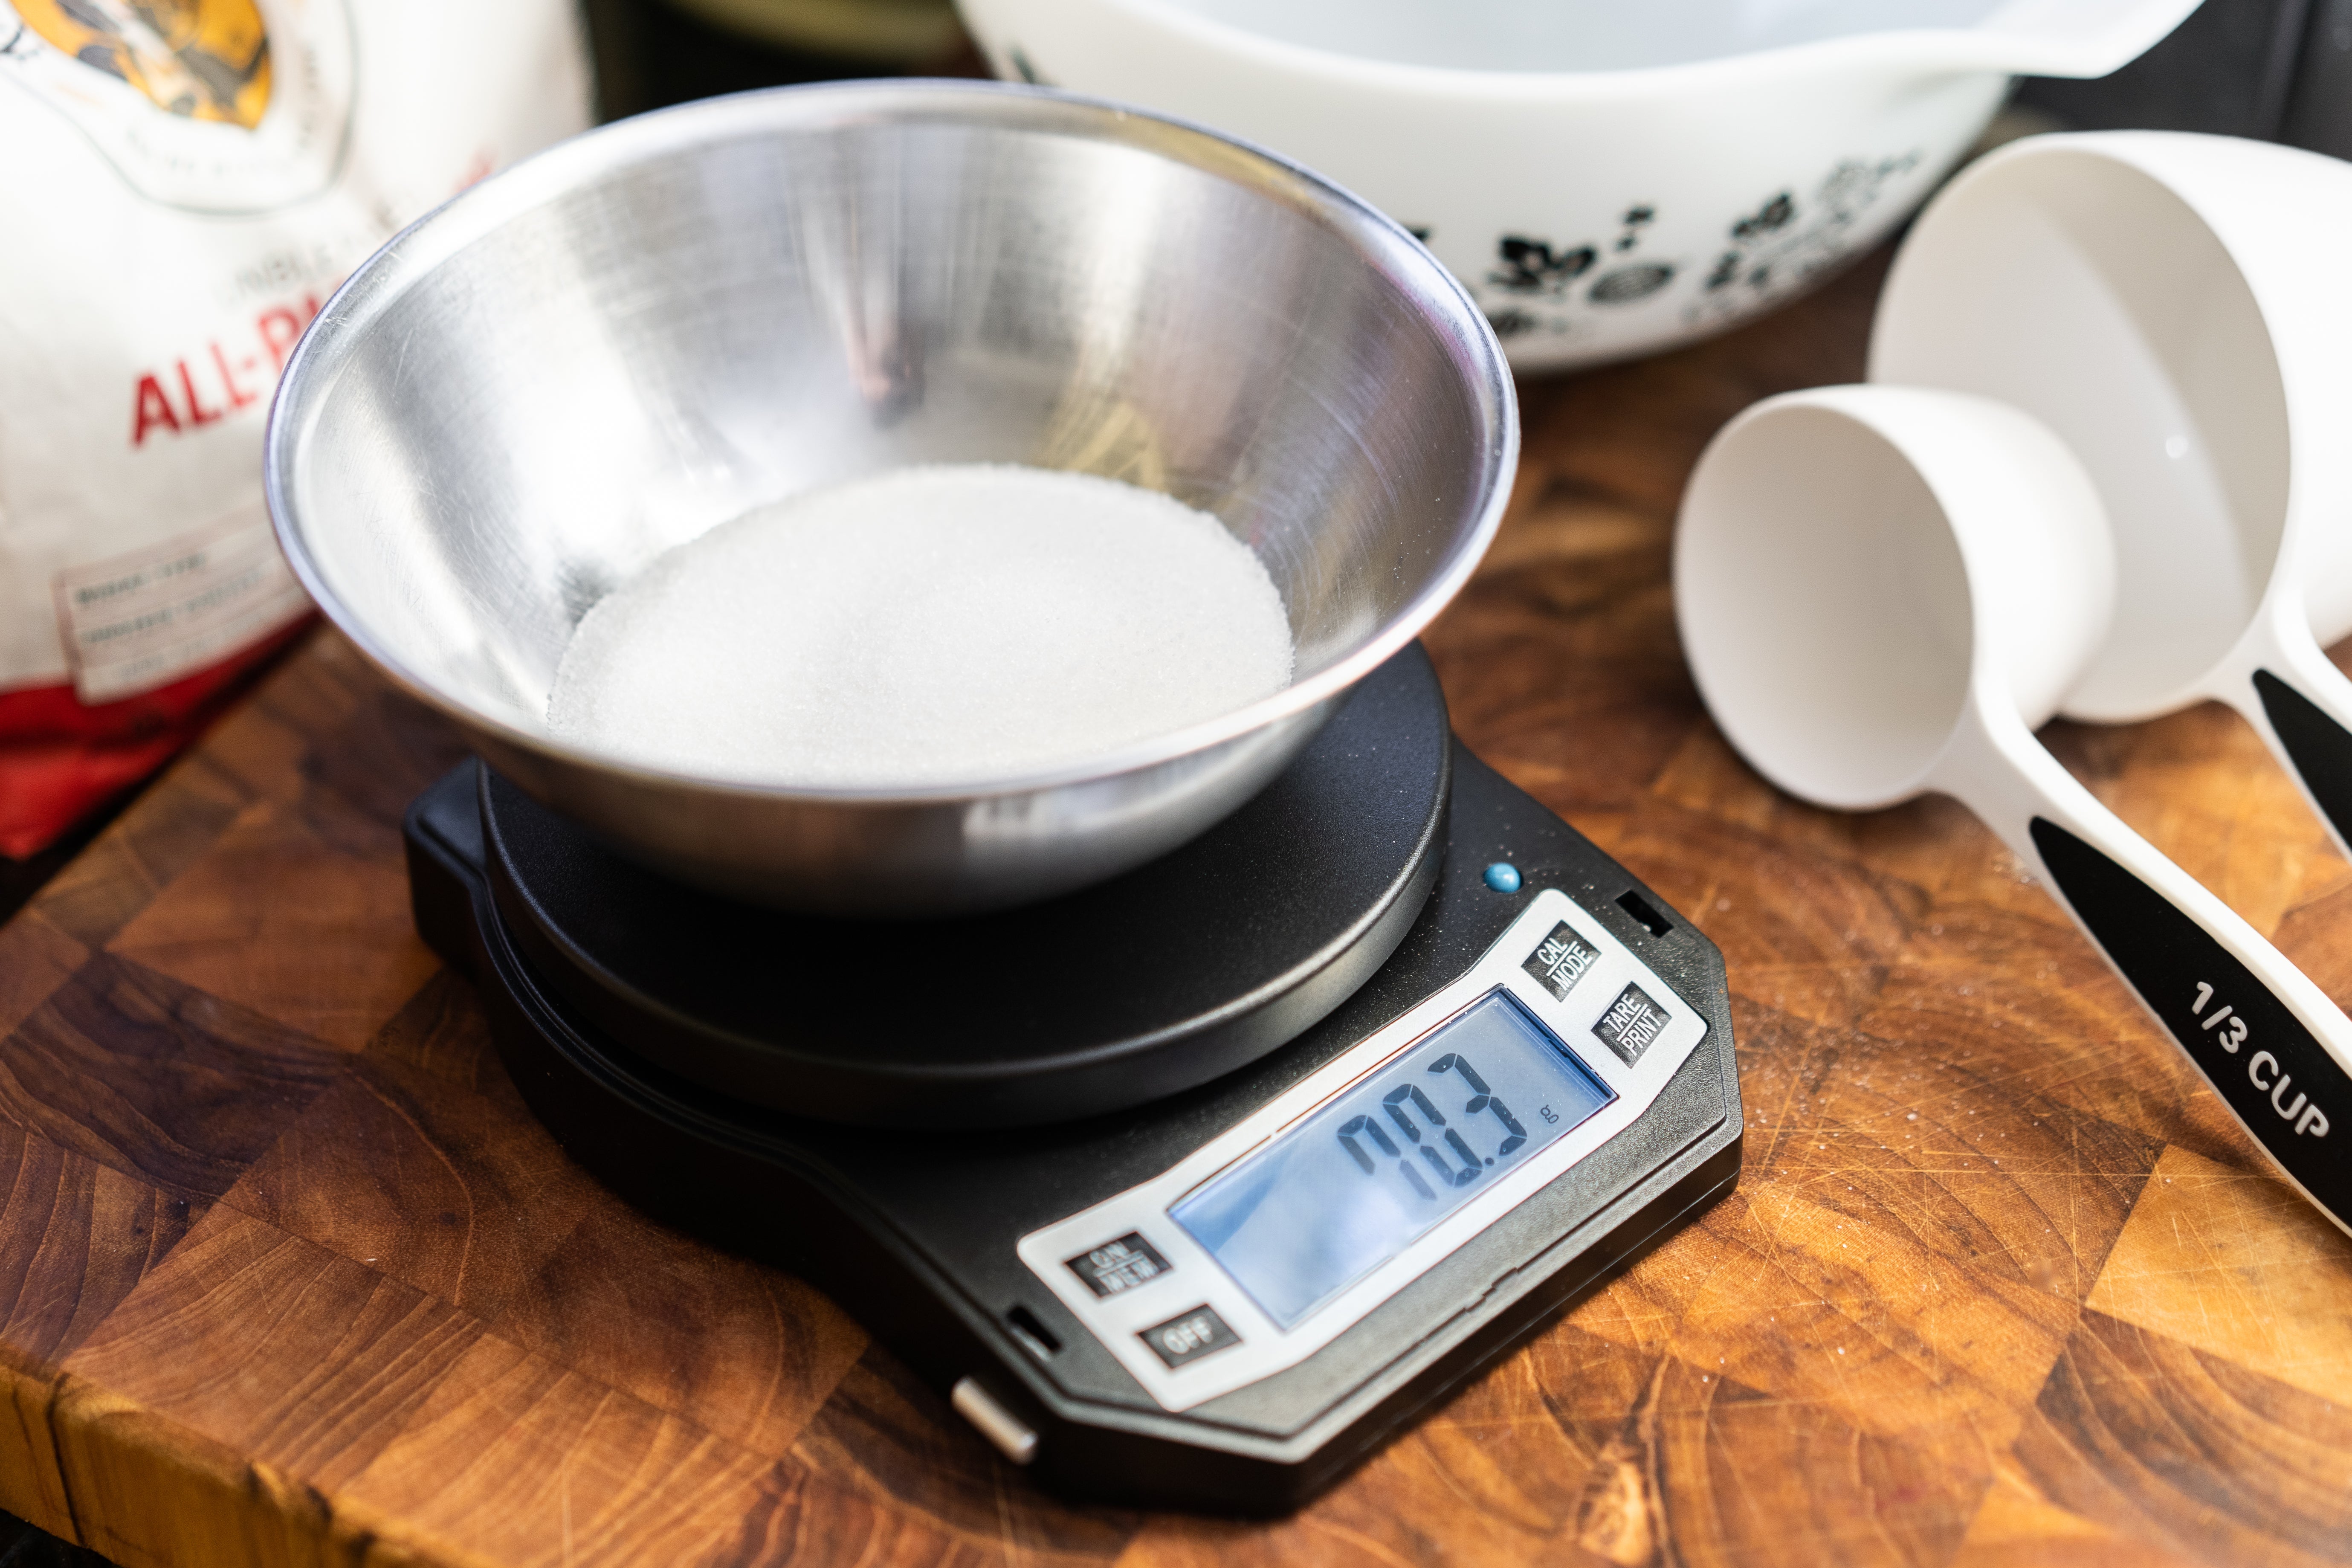 bowl of flour on the American Weigh Scales